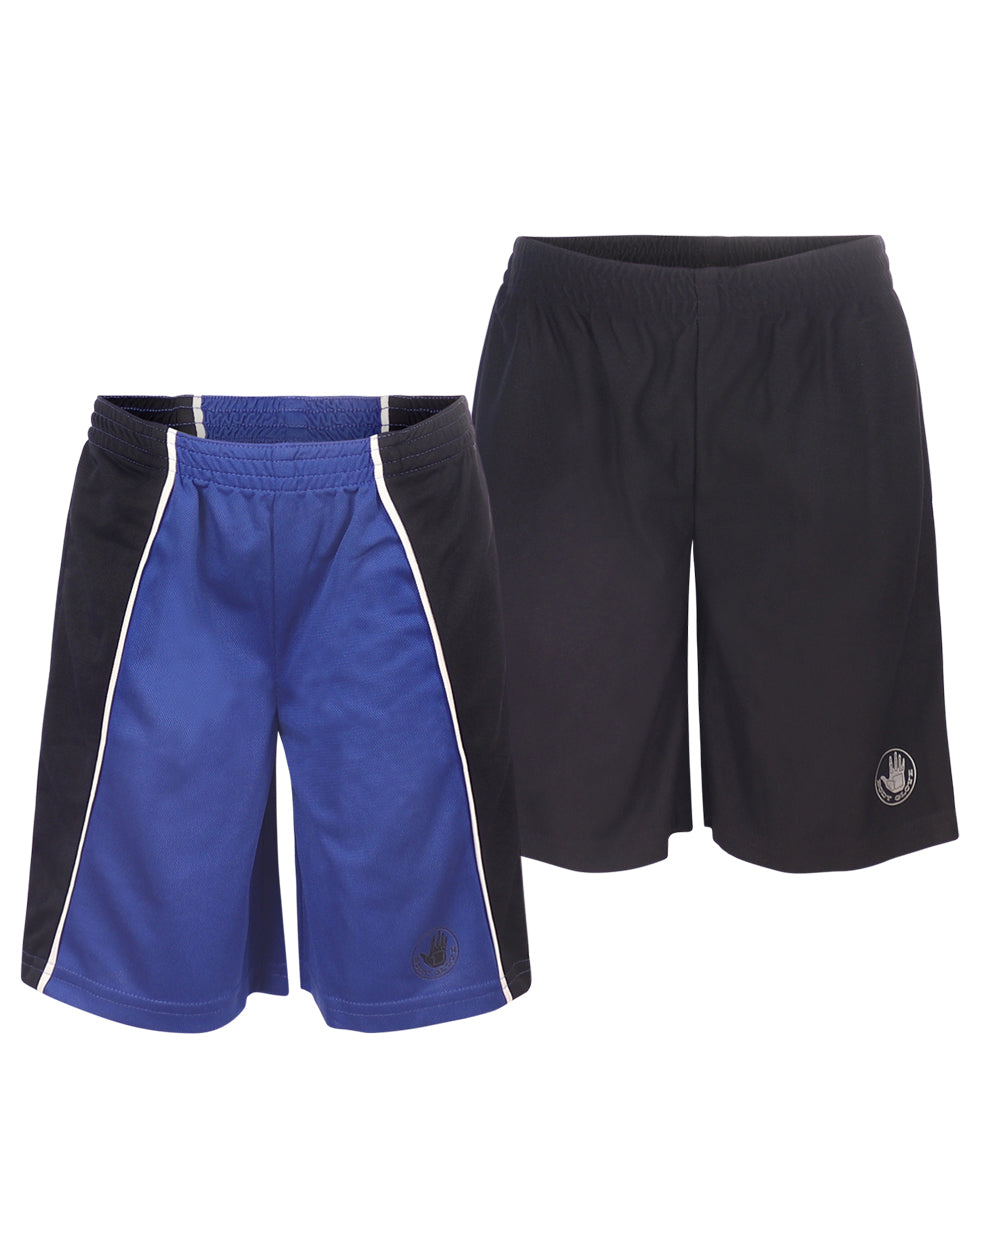 Boys' Solid and Two-Tone Shorts Set (8-18) - Dark Navy & Blue